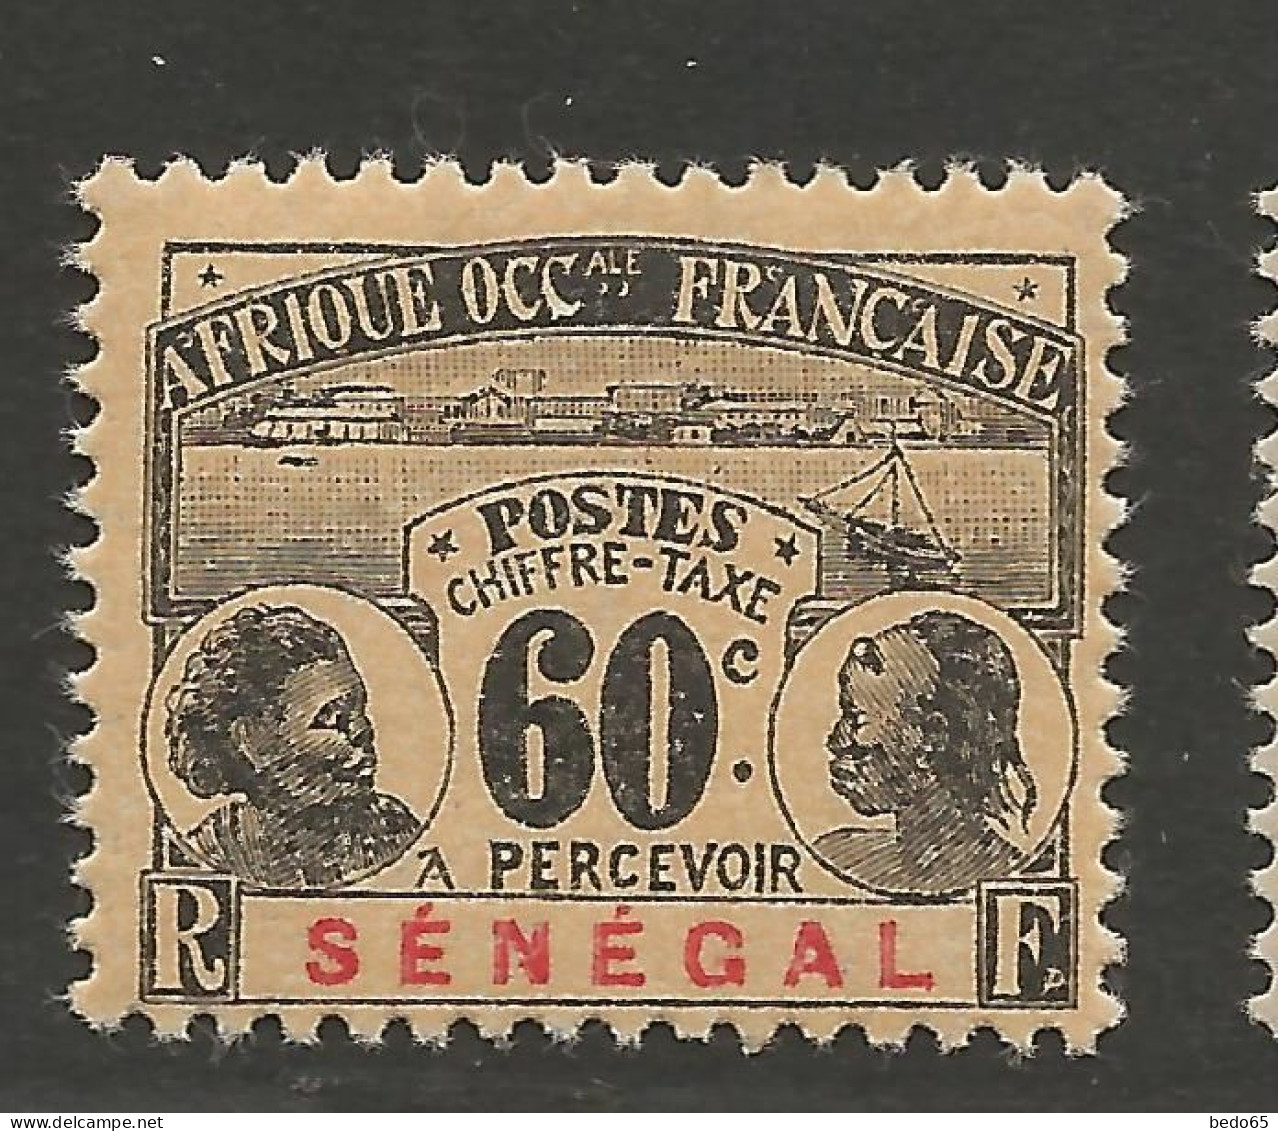 SENEGAL TAXE N° 10 NEUF*  CHARNIERE / Hinge / MH - Postage Due